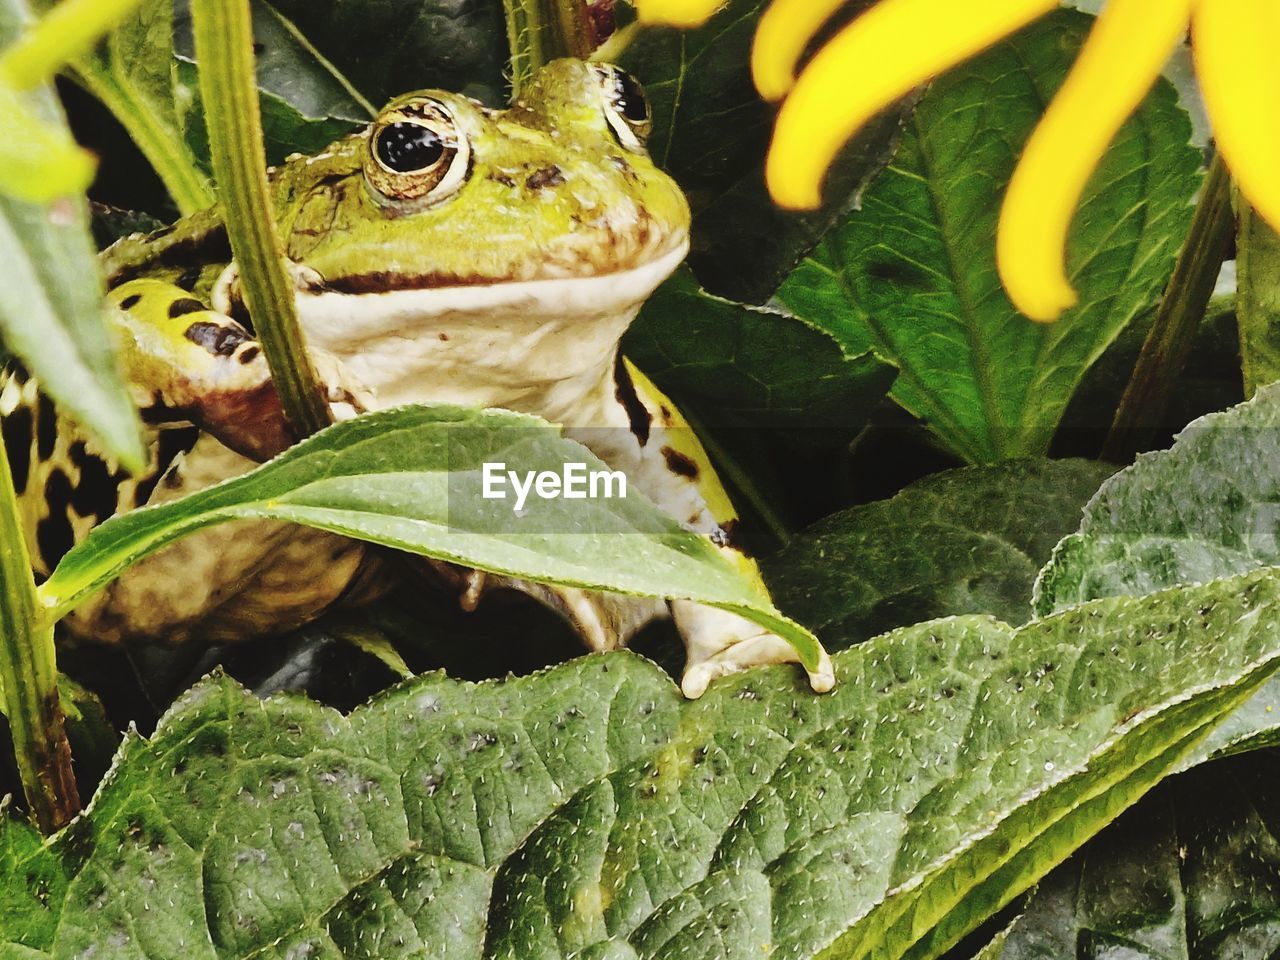 frog, animal, animal themes, plant part, animal wildlife, leaf, green, wildlife, plant, nature, true frog, one animal, amphibian, growth, no people, close-up, flower, reptile, day, tree frog, beauty in nature, outdoors, water